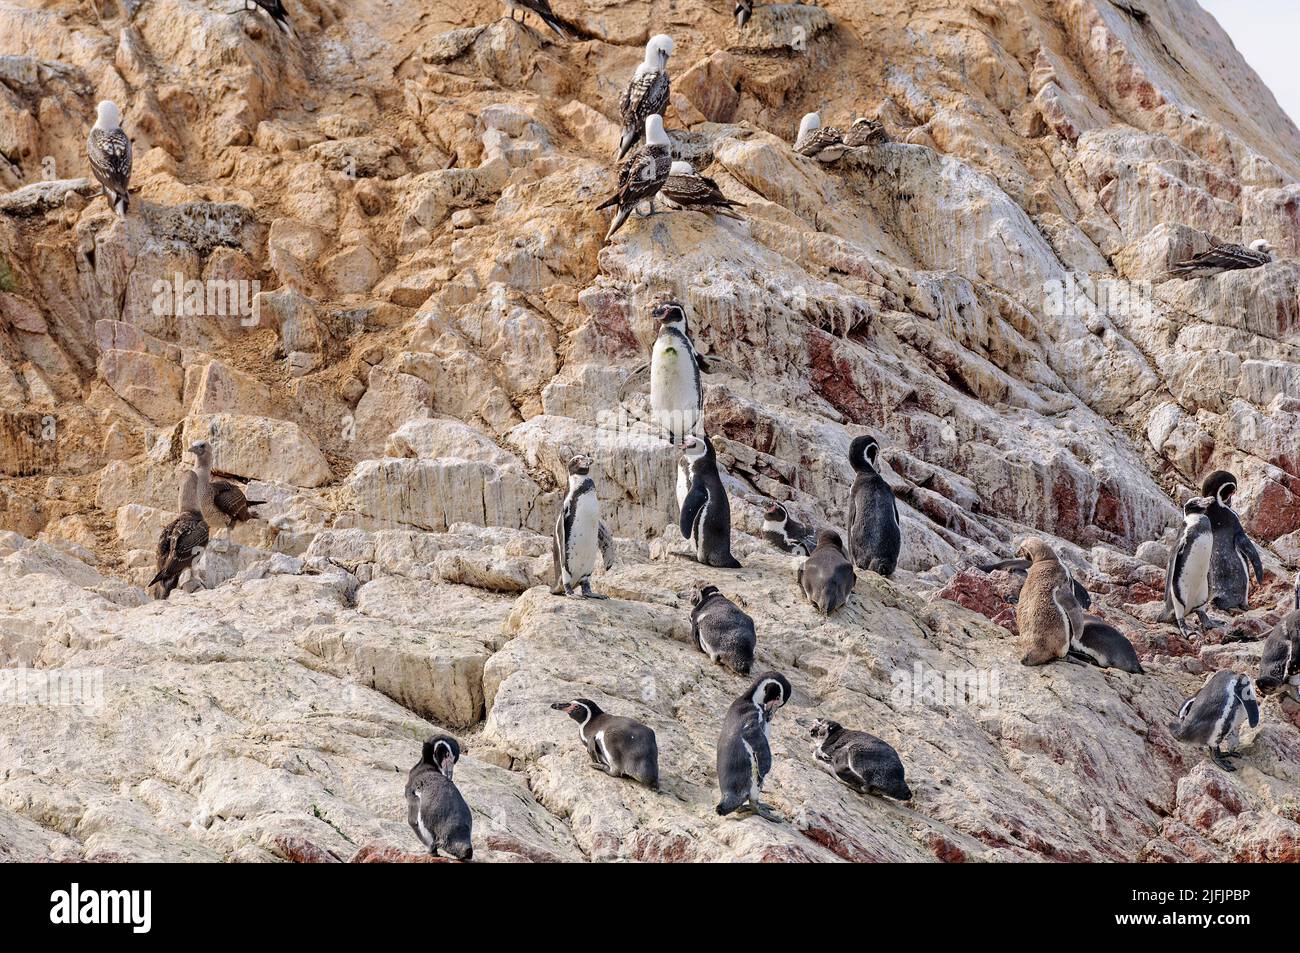 A Group of Humboldt Penguins on a Remote Island on the Ballestas Island in Peru Stock Photo